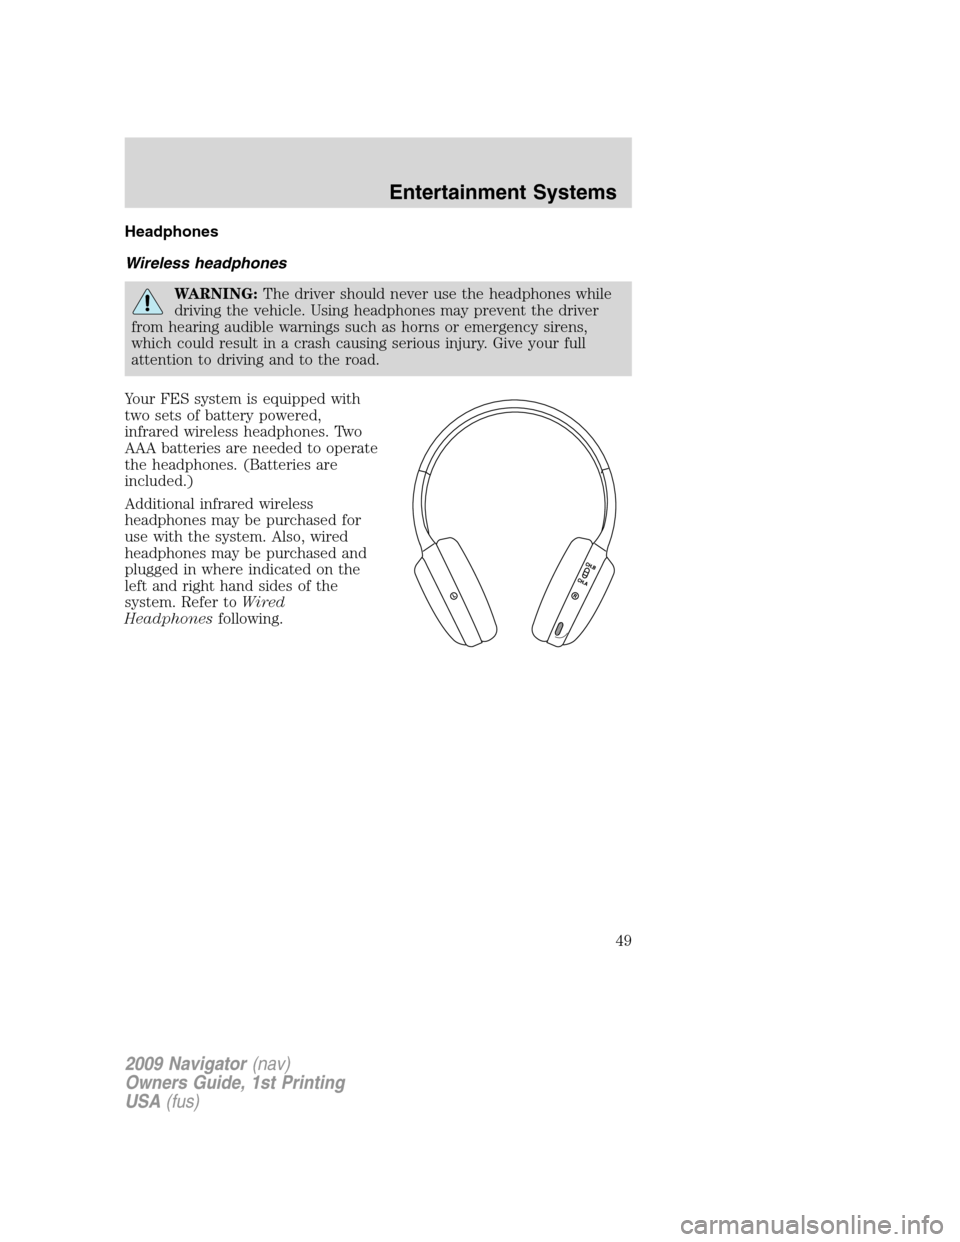 LINCOLN NAVIGATOR 2009  Owners Manual Headphones
Wireless headphones
WARNING:The driver should never use the headphones while
driving the vehicle. Using headphones may prevent the driver
from hearing audible warnings such as horns or emer